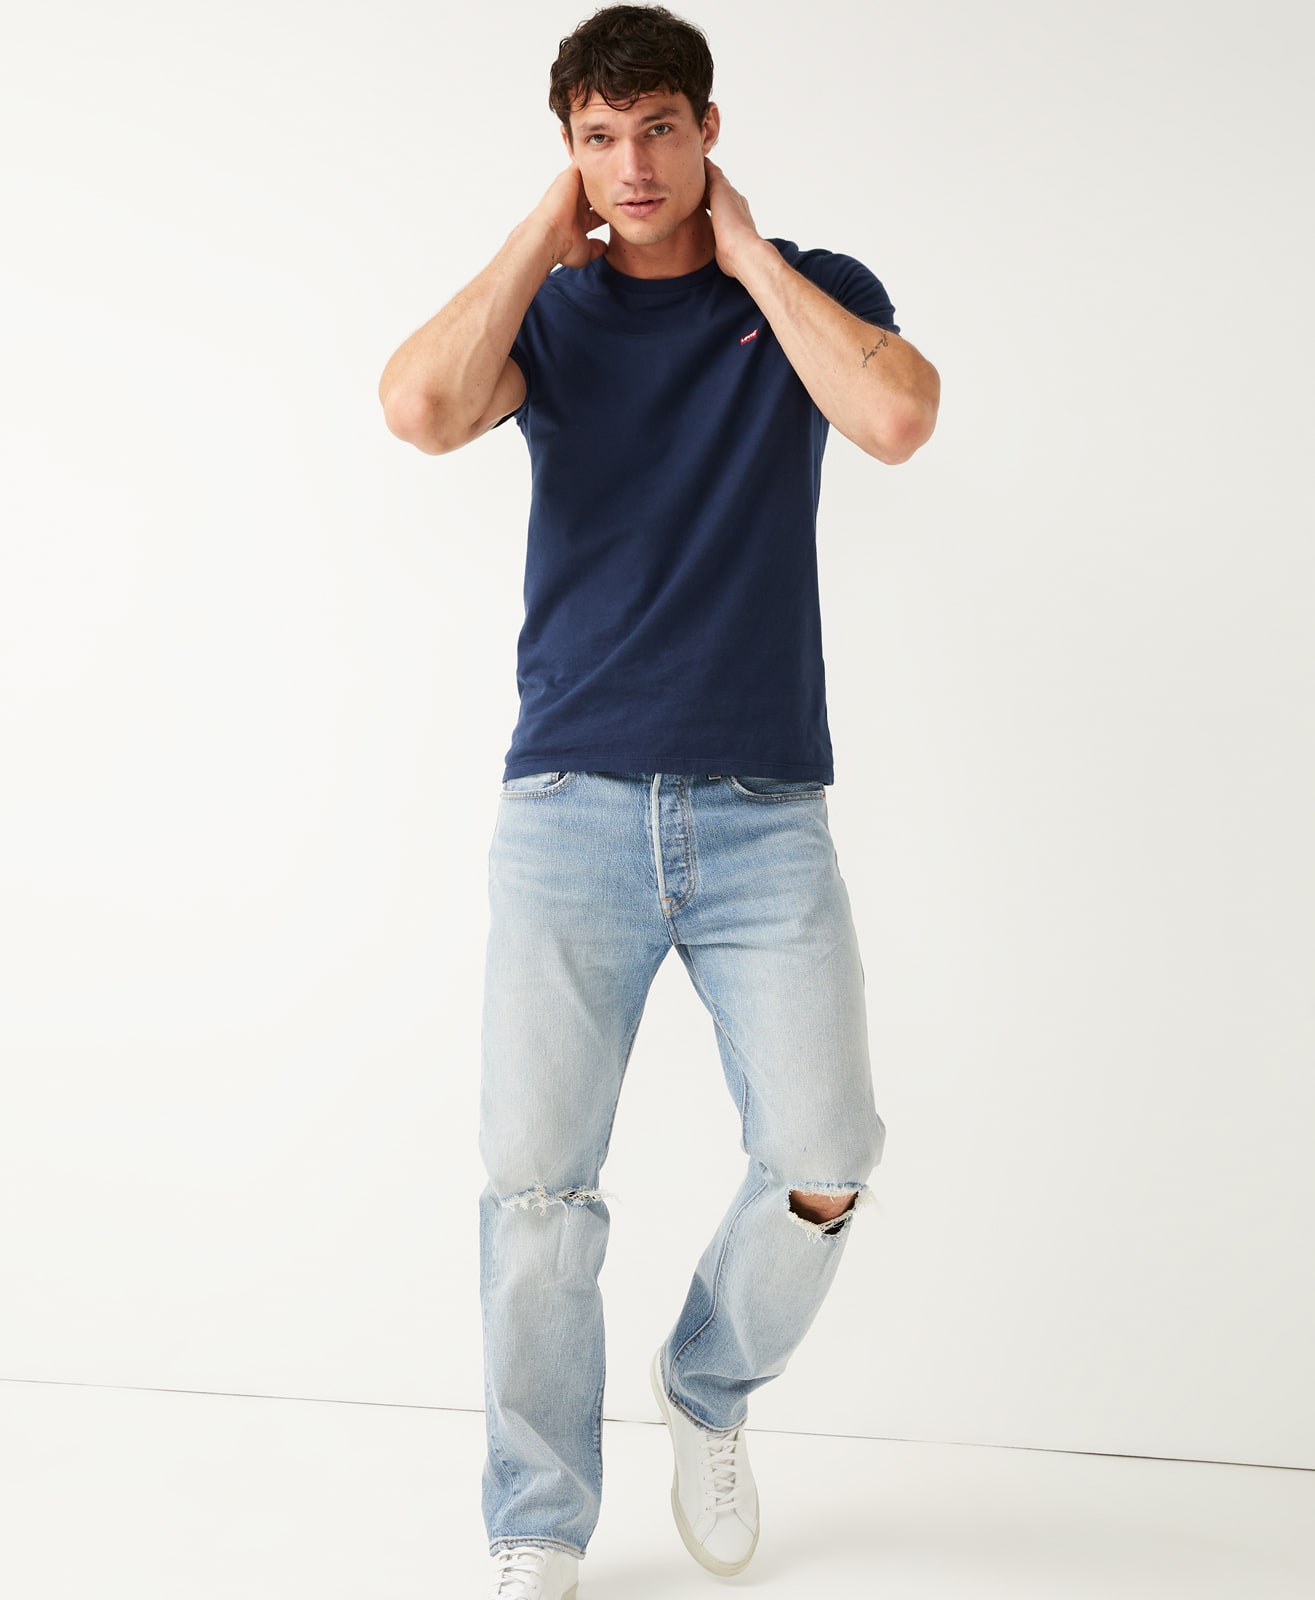 Levi’s - The Jean Fits Guys Should be Rocking | Just Jeans™ Online